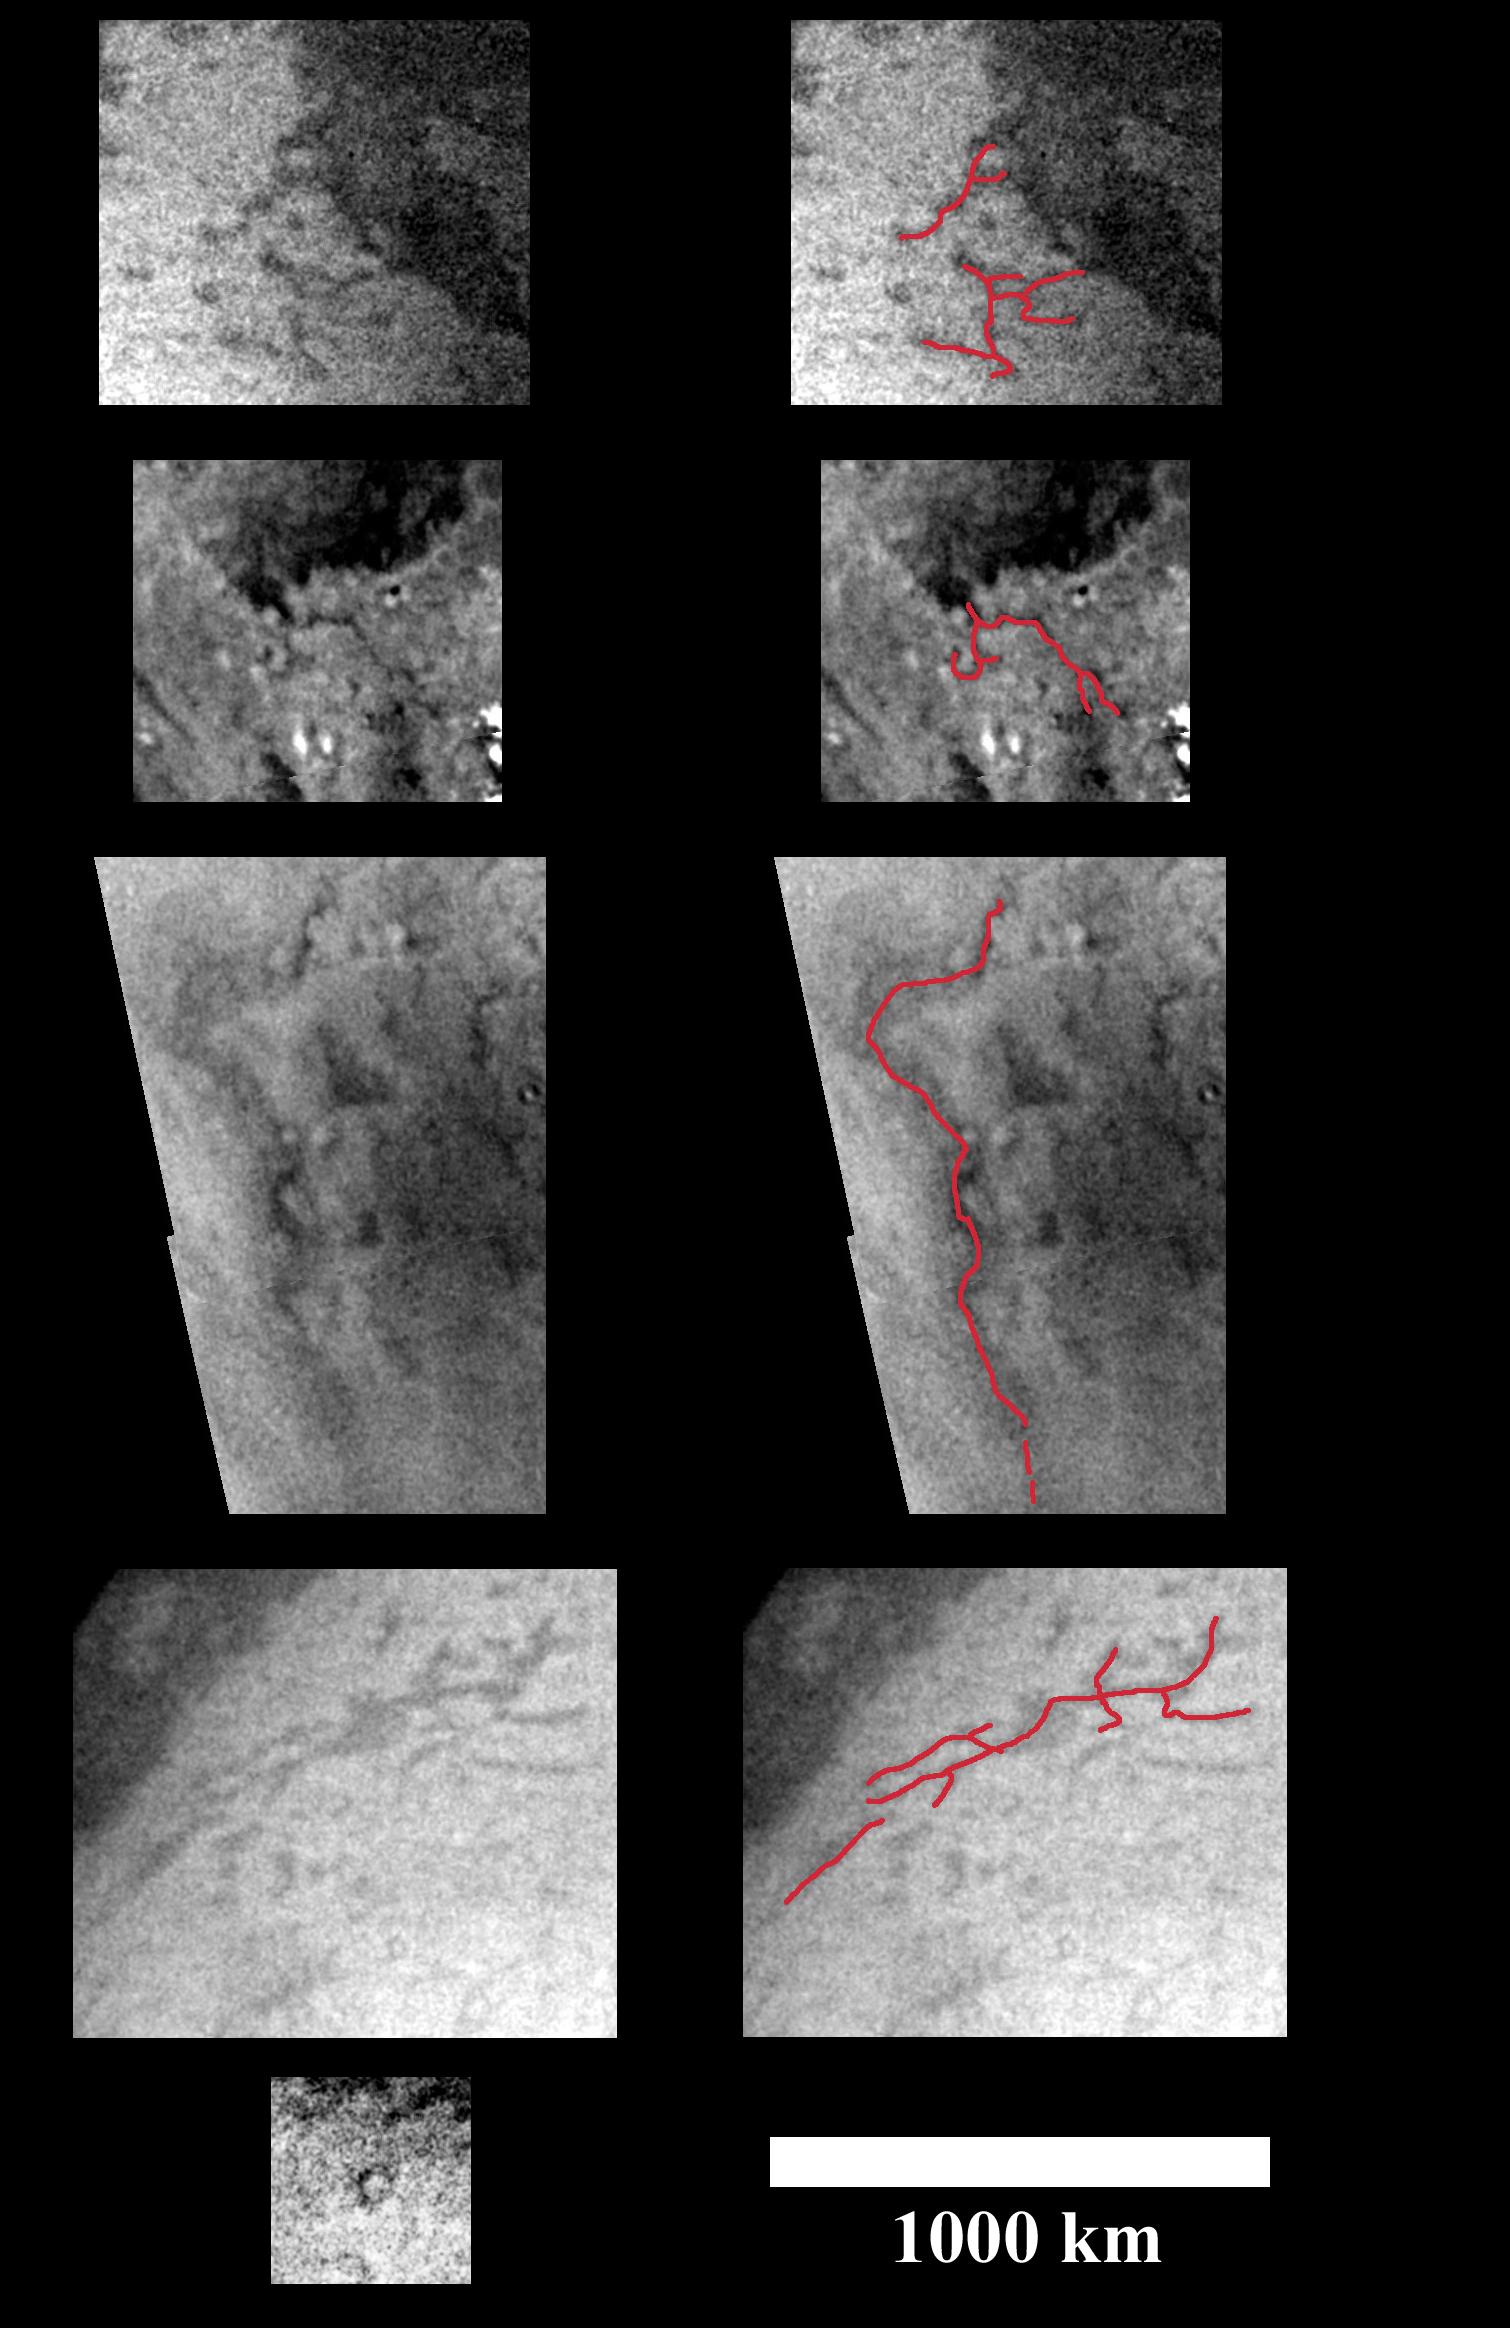 Close-up images of Titan, some with features highlighted